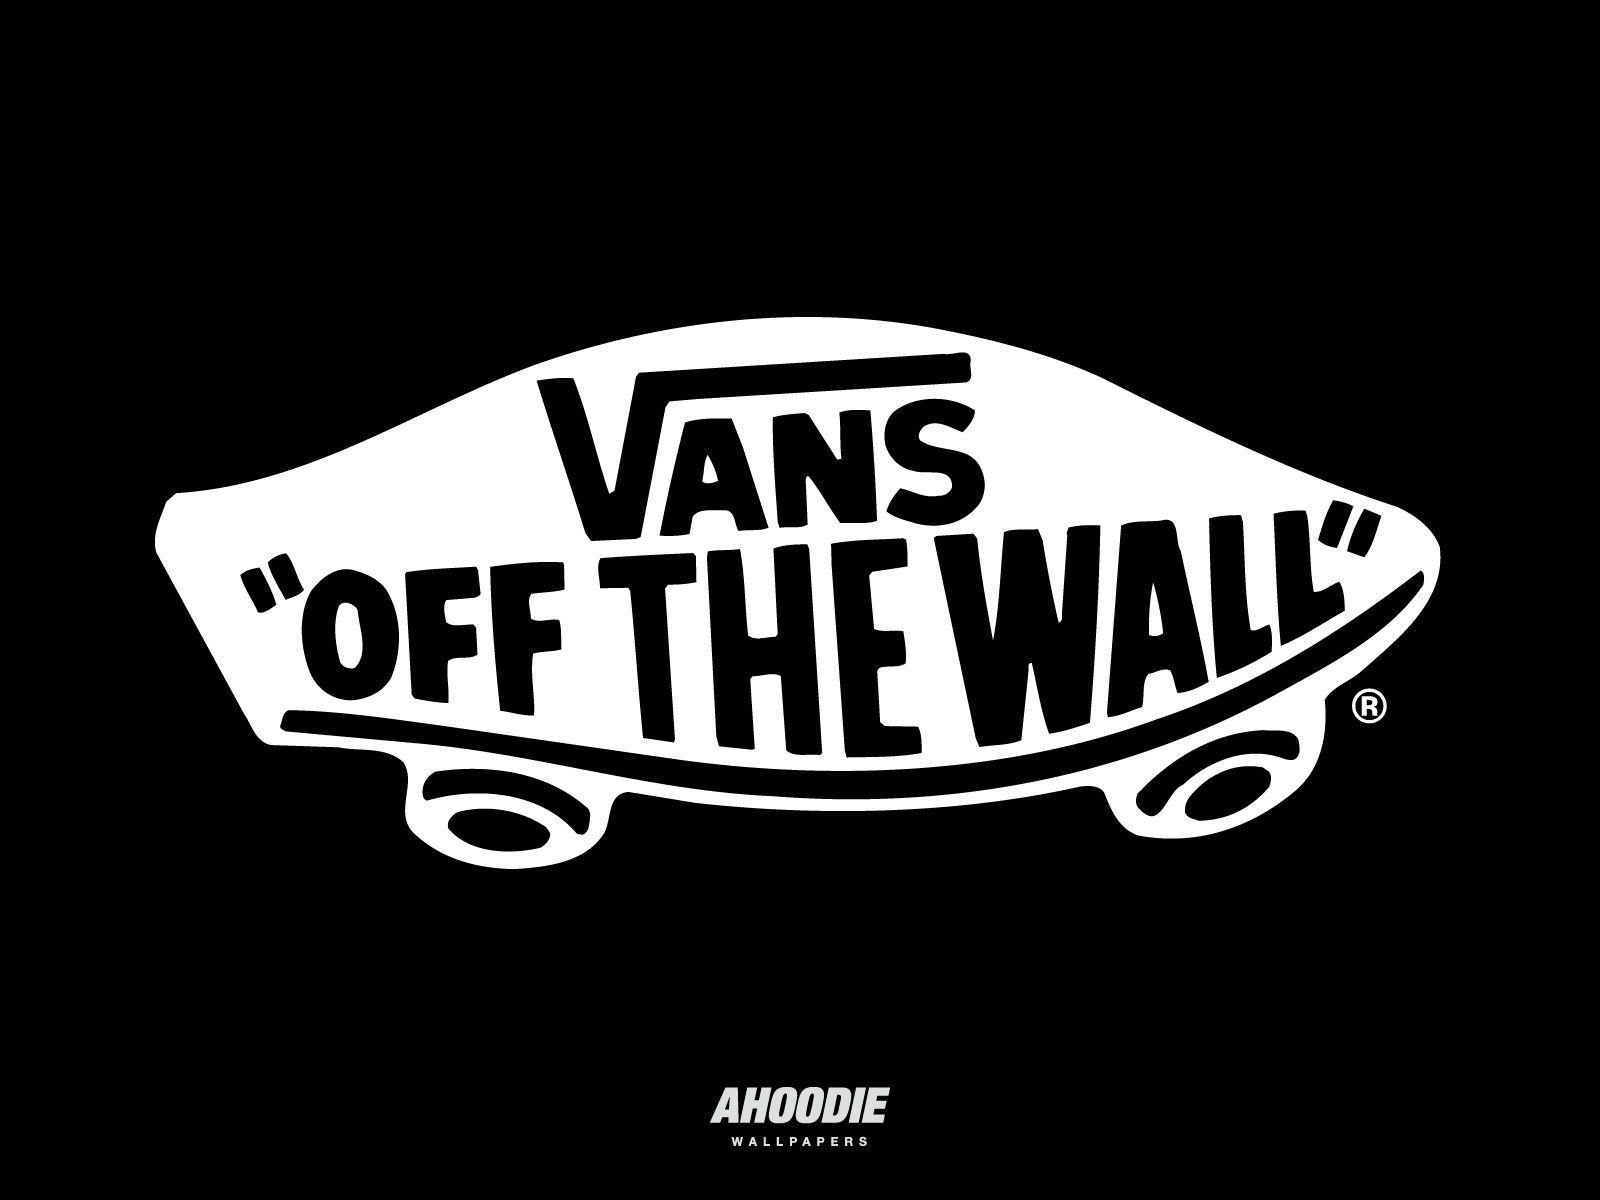 Crazy Vans Logo - Vans. Havn't worn them in years but I think I might have to pick up ...